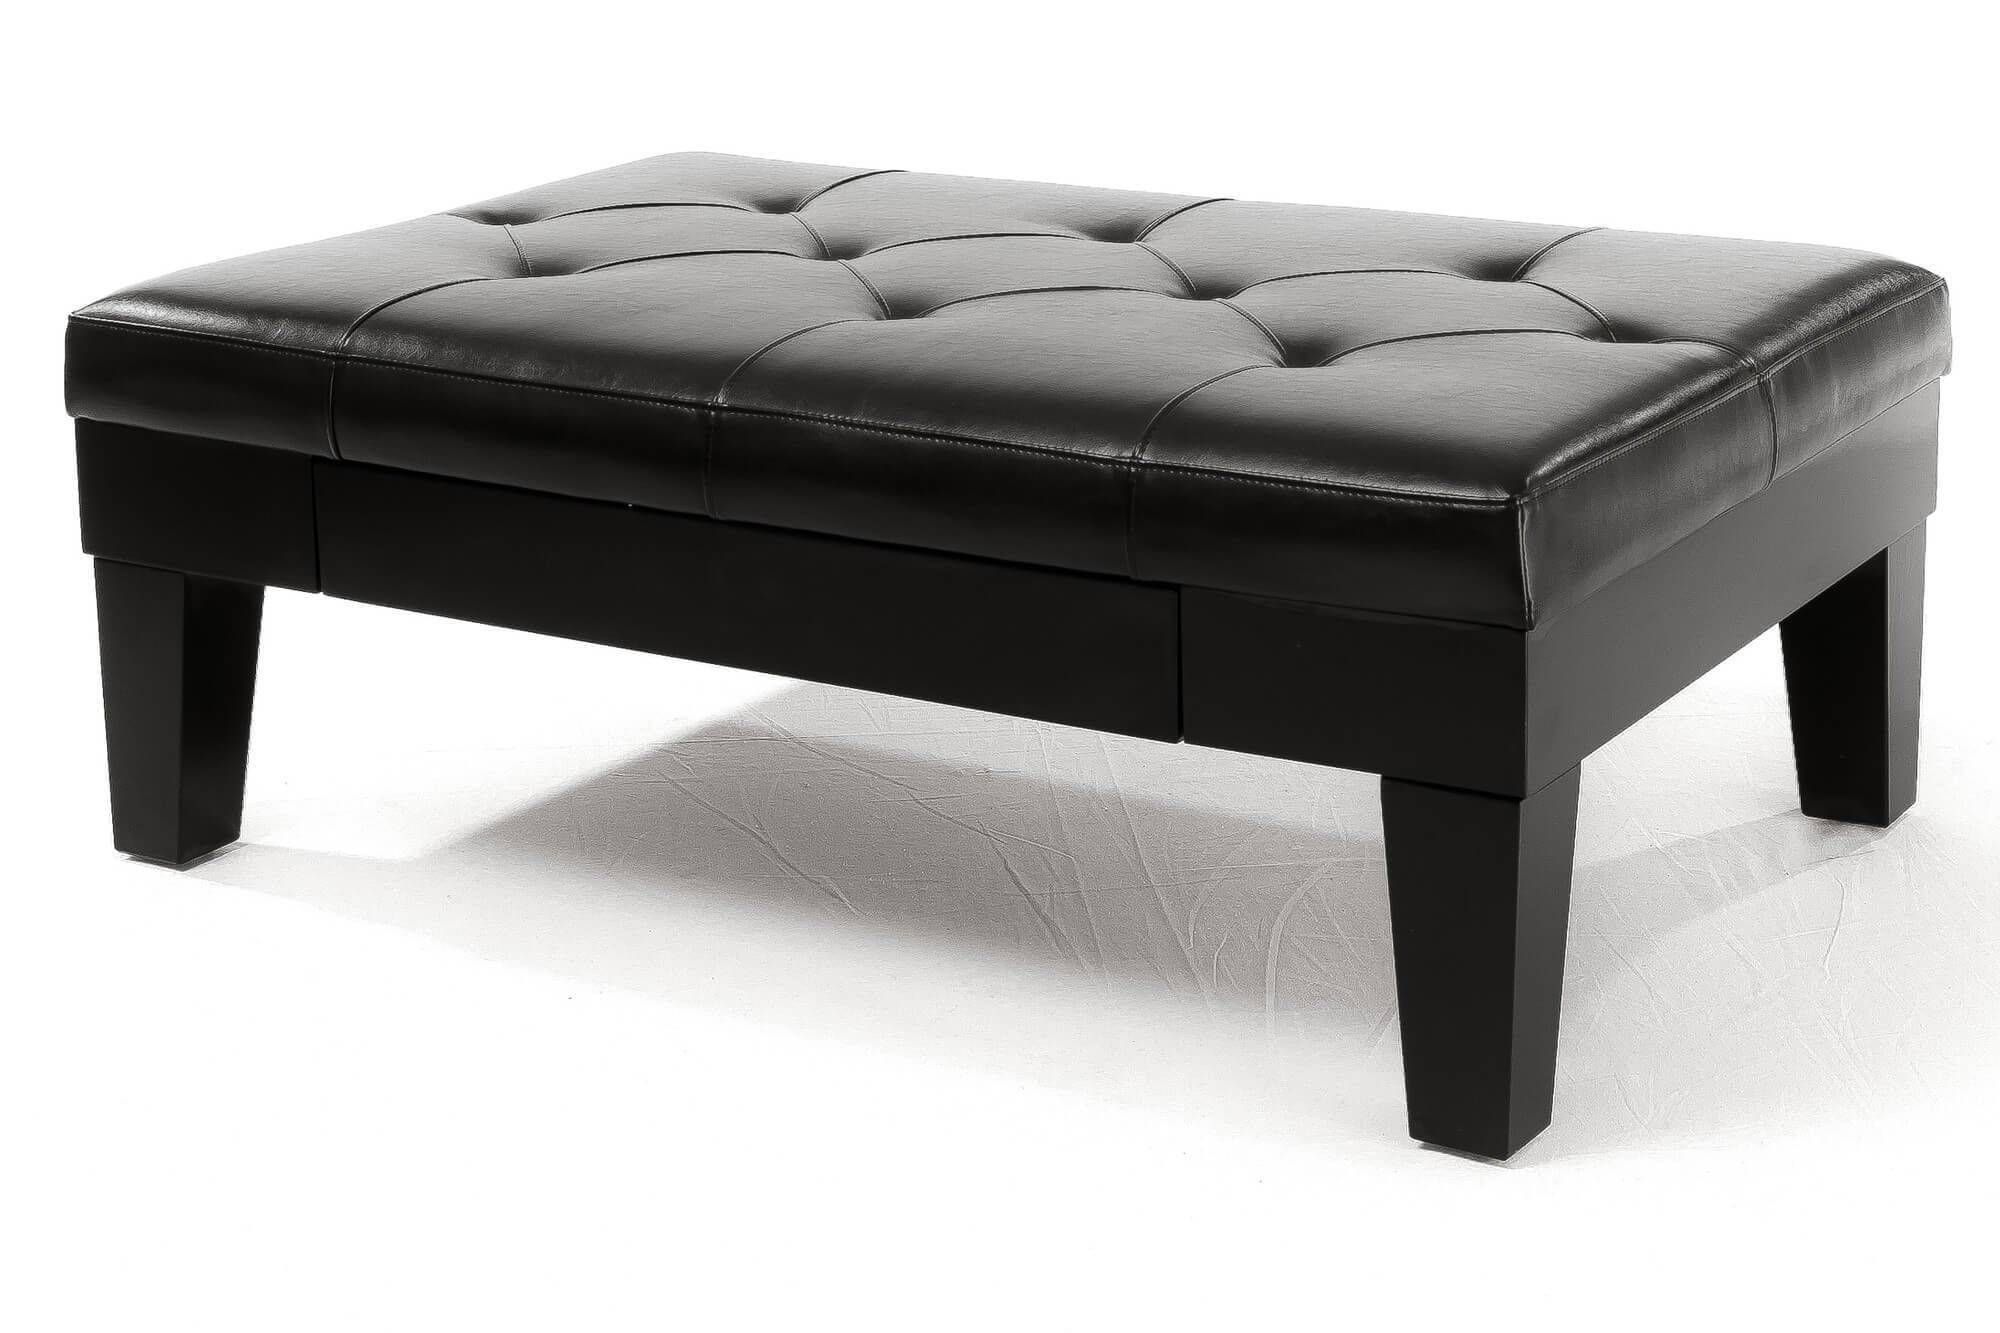 Modern Coffee Table From Black Leather Also Functioned As Ottoman Throughout Big Black Coffee Tables (View 25 of 30)